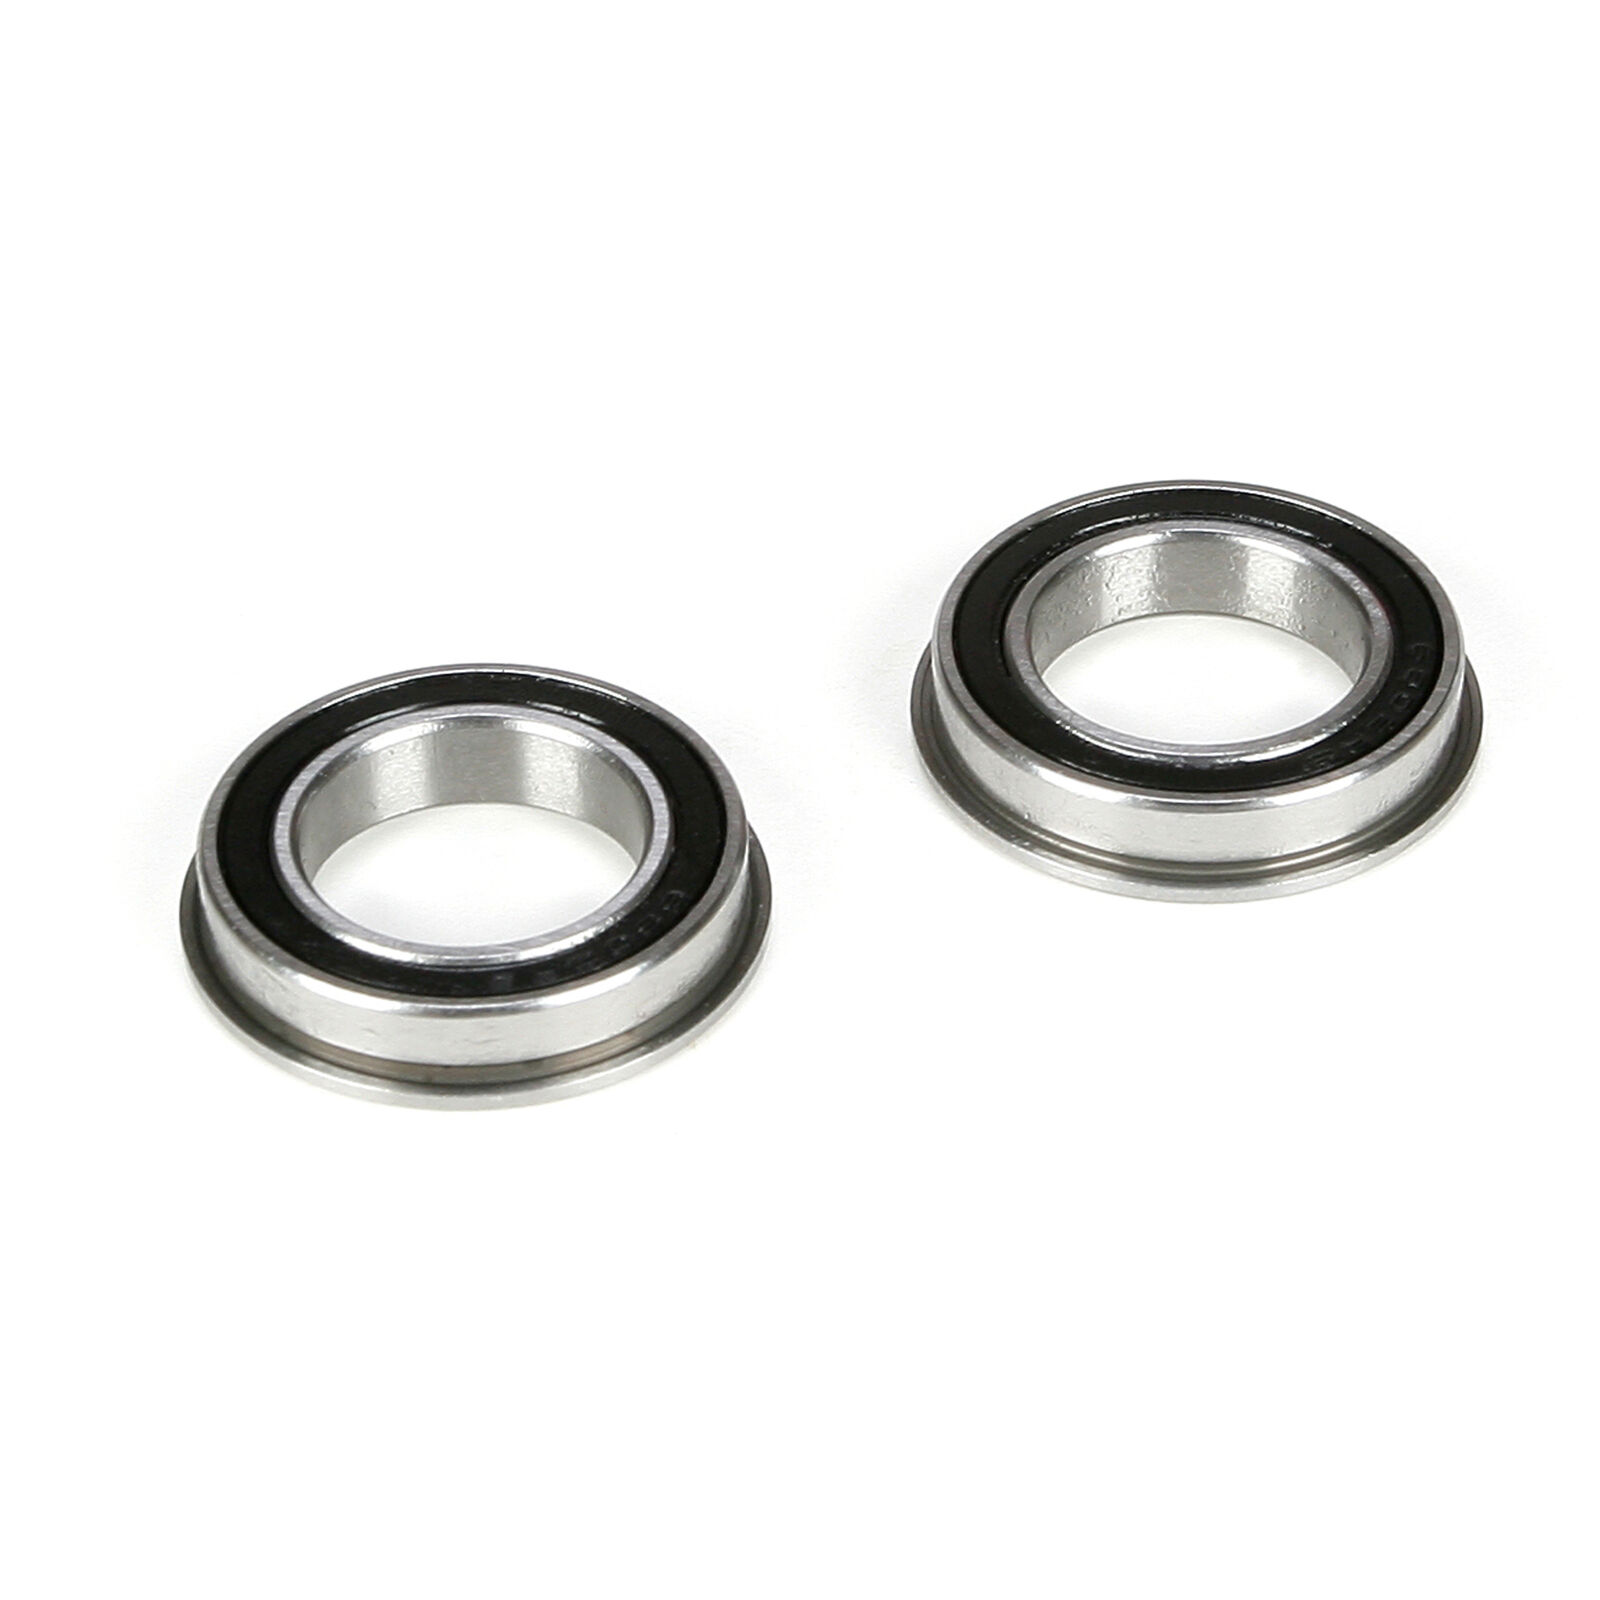 Diff Support Bearings, 15x24x5mm, Flanged (2): 5IVE-T, MINI WRC